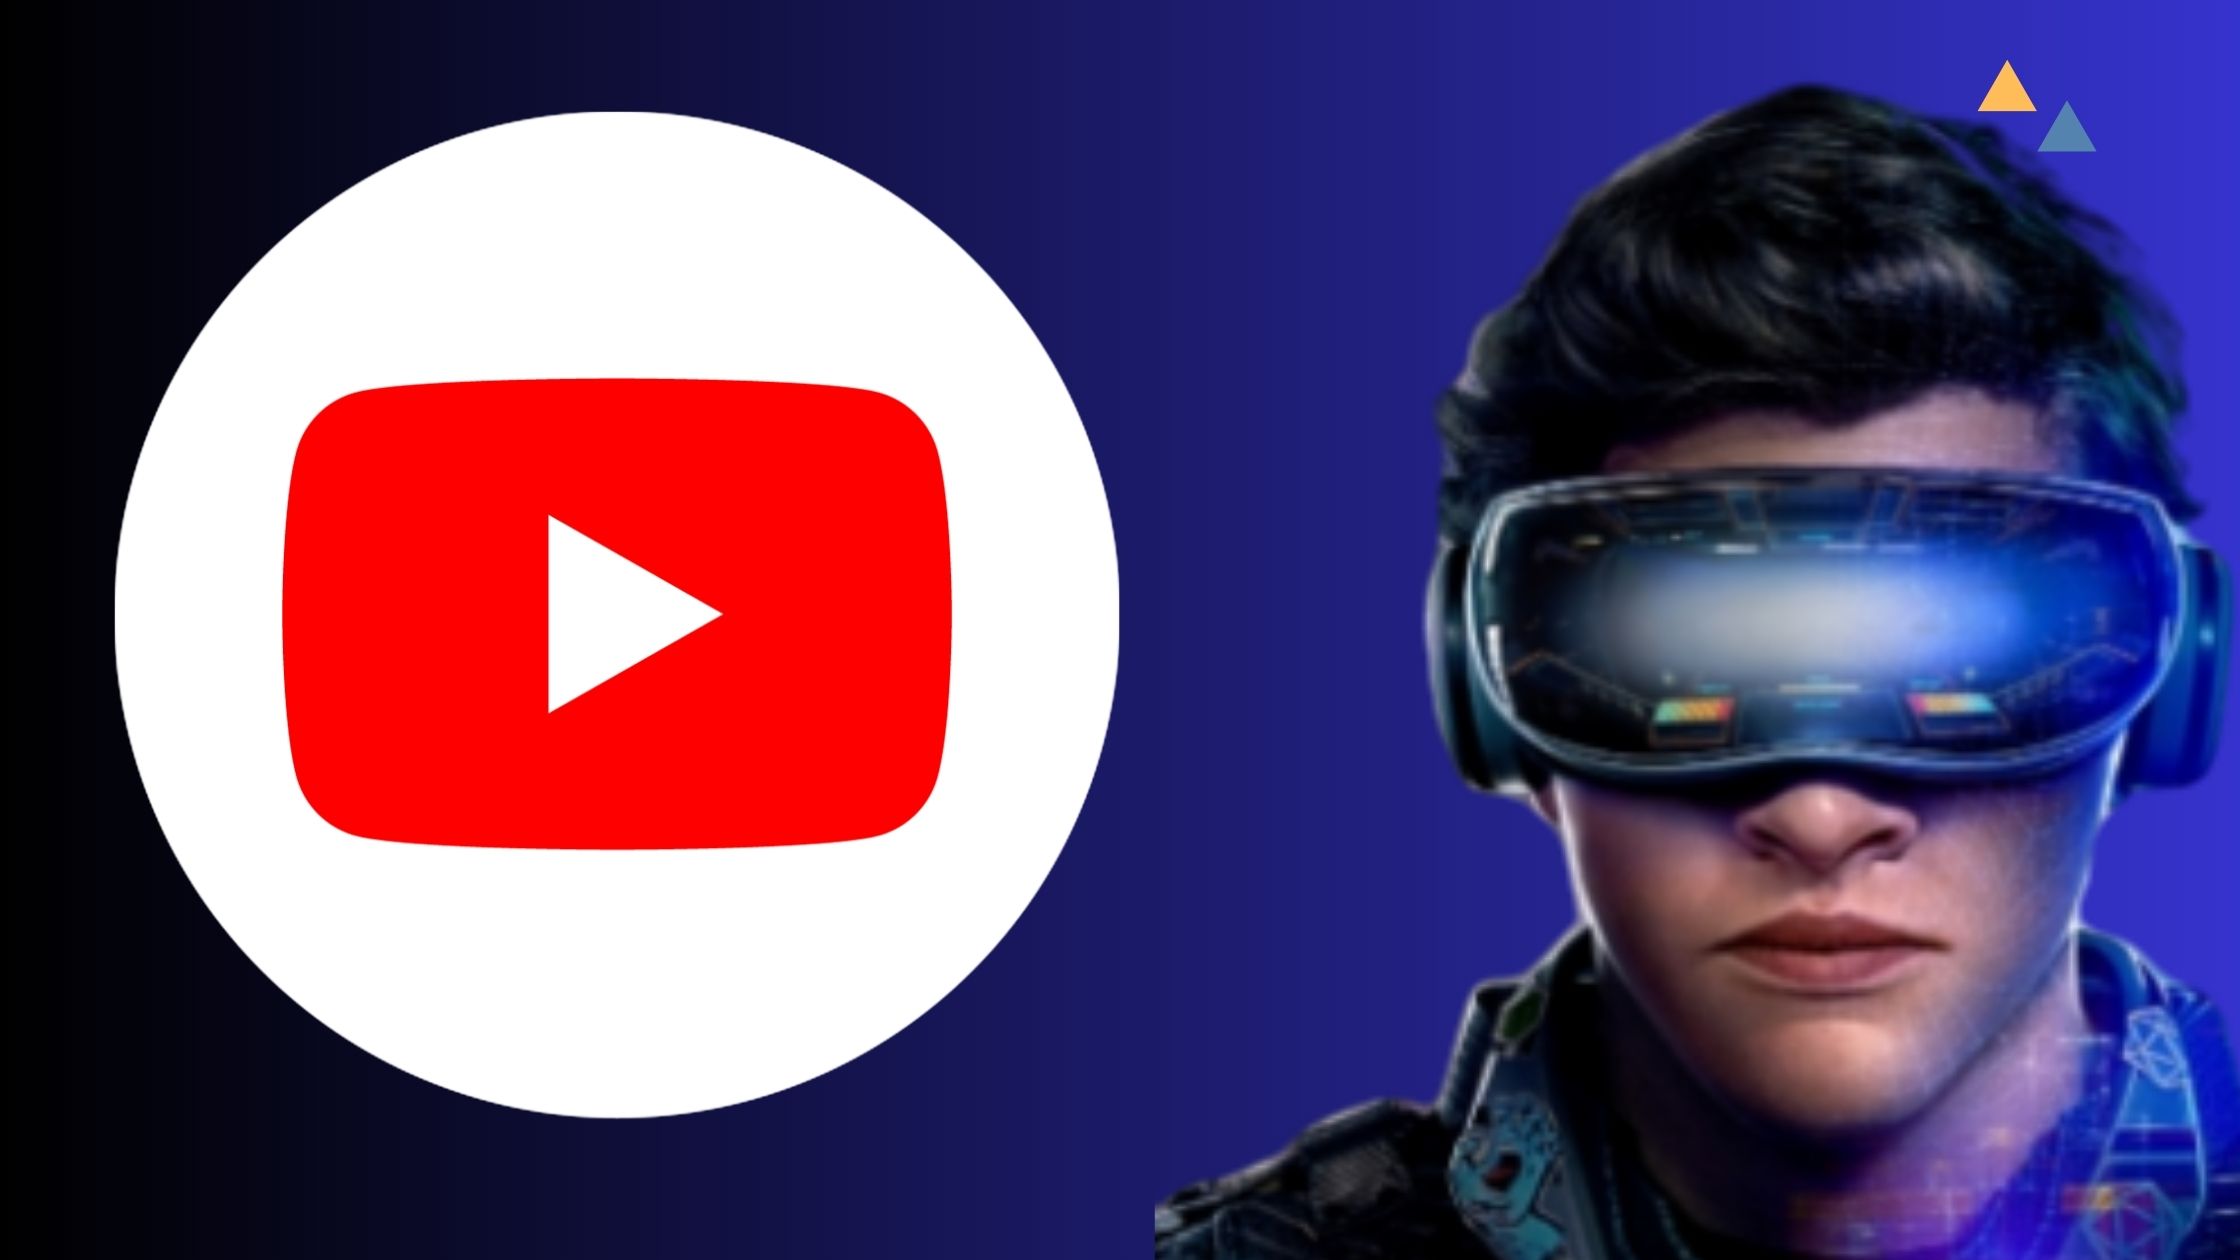 The Future of Online Video: What Will Replace YouTube?